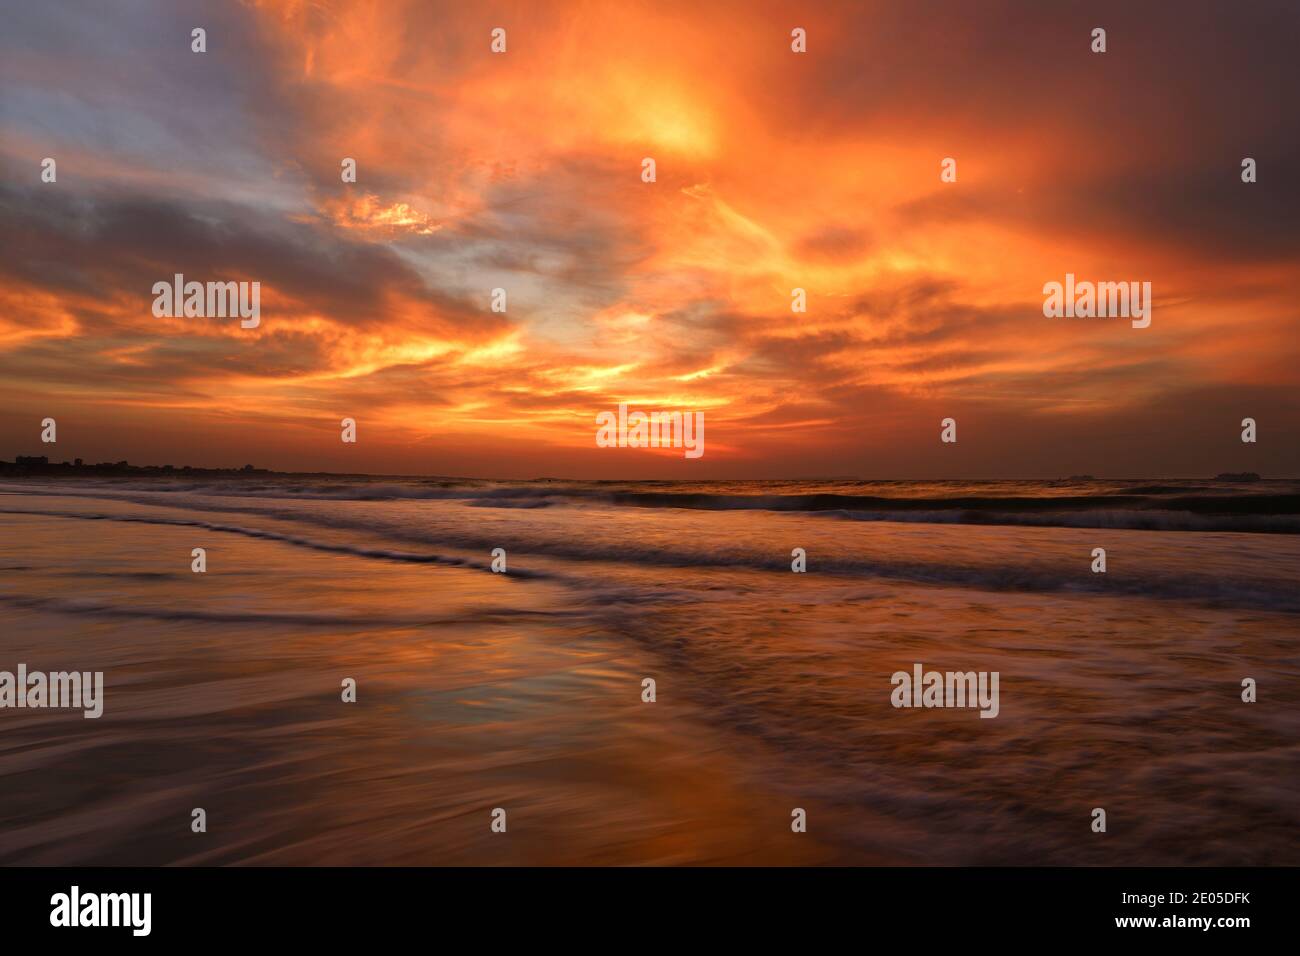 The rising sun sets fire to the cloud filled sky as waves roll over Bournemouth's award winning beach below. Stock Photo